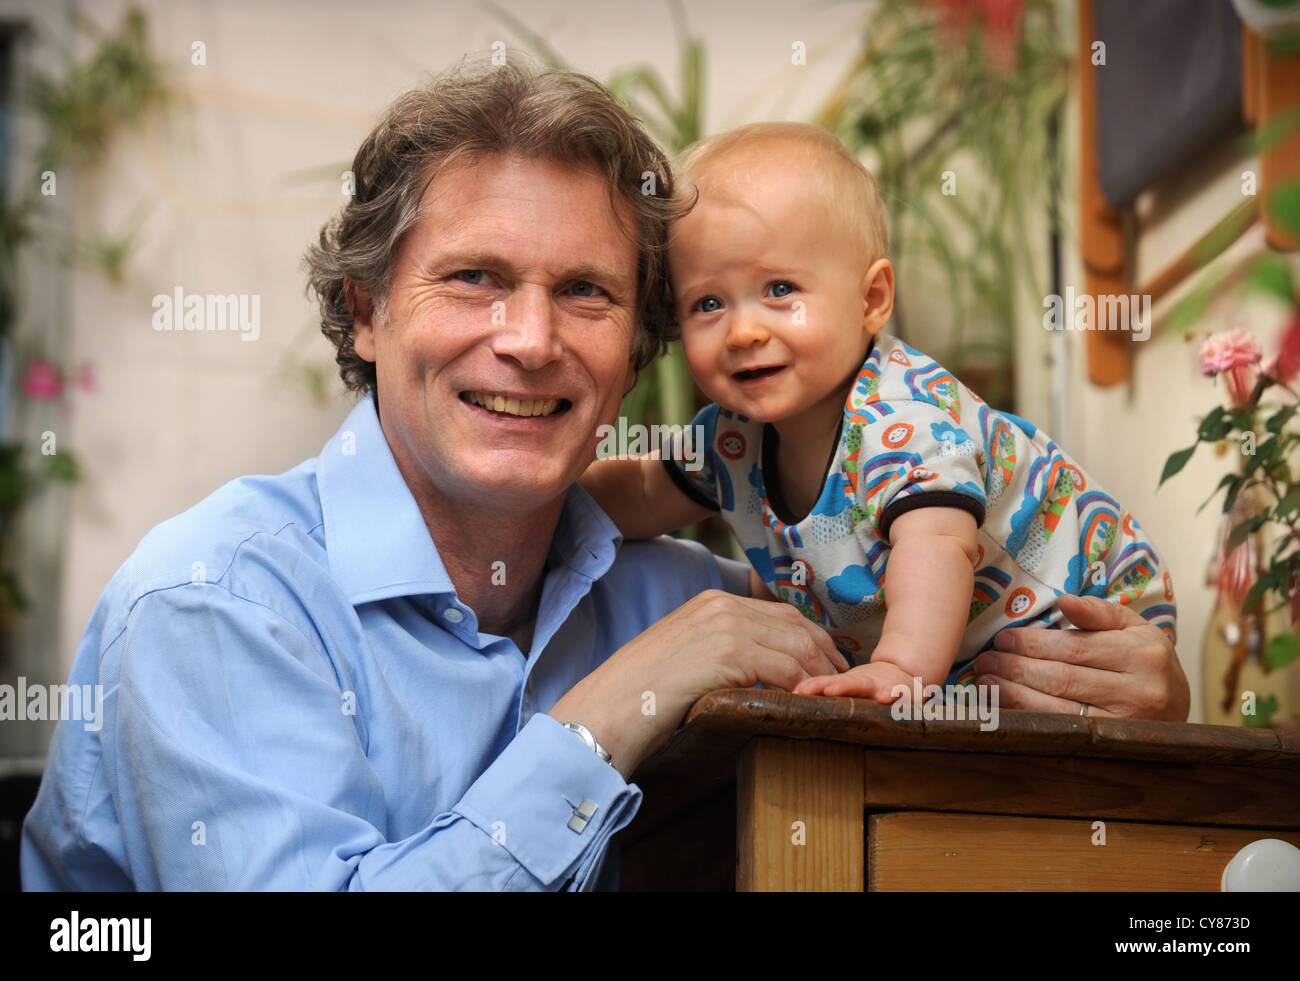 A middle aged father with his baby UK Stock Photo